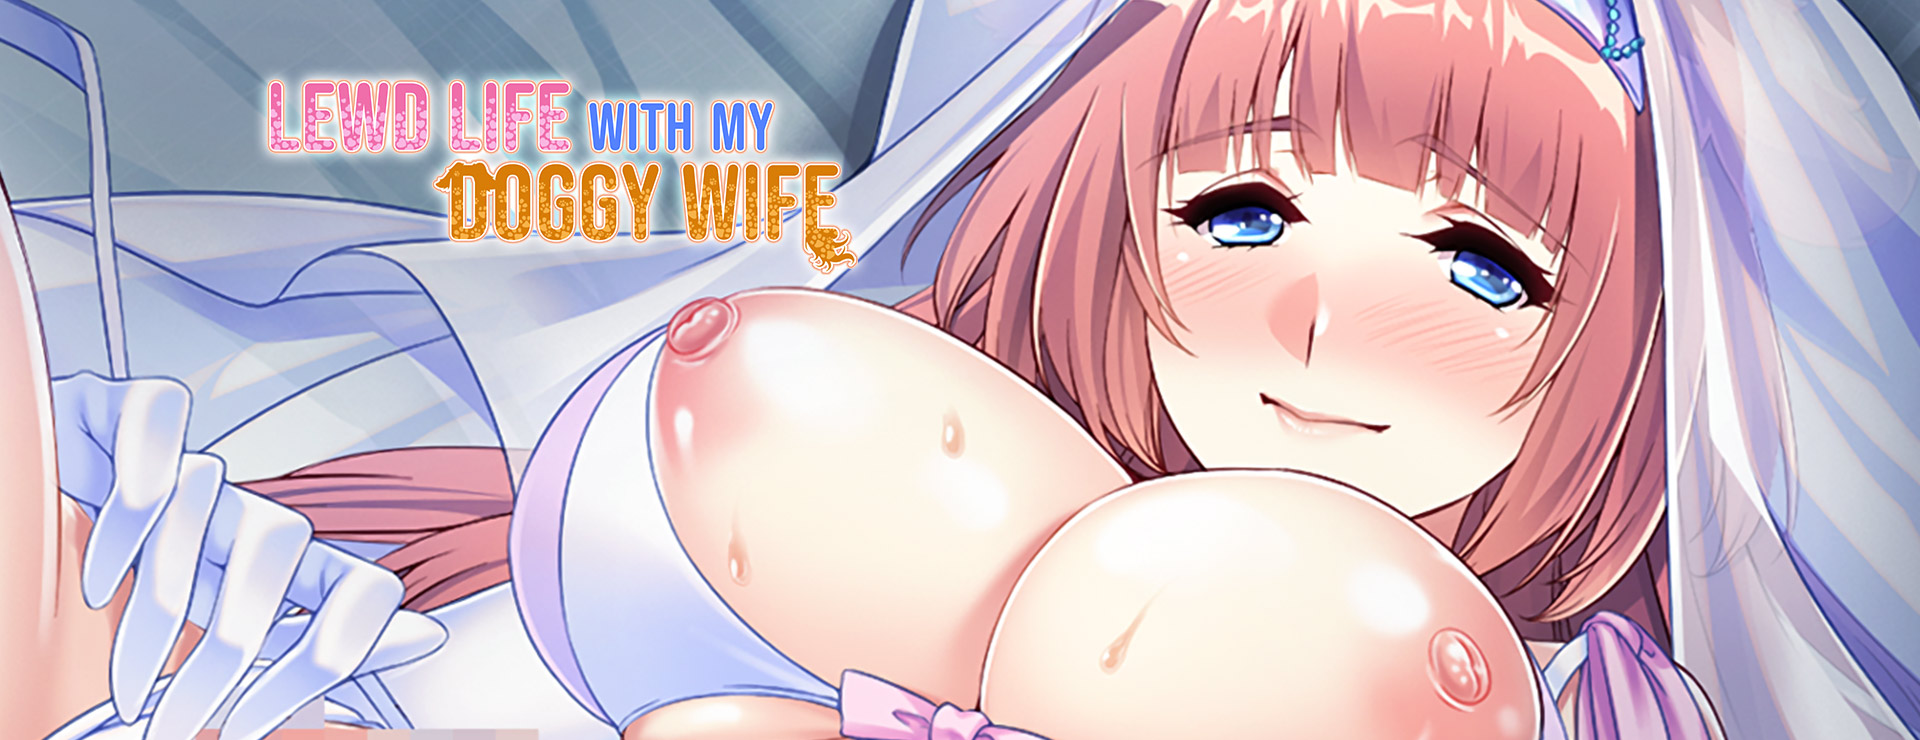 Lewd Life with my Doggy Wife! - Visual Novel Game